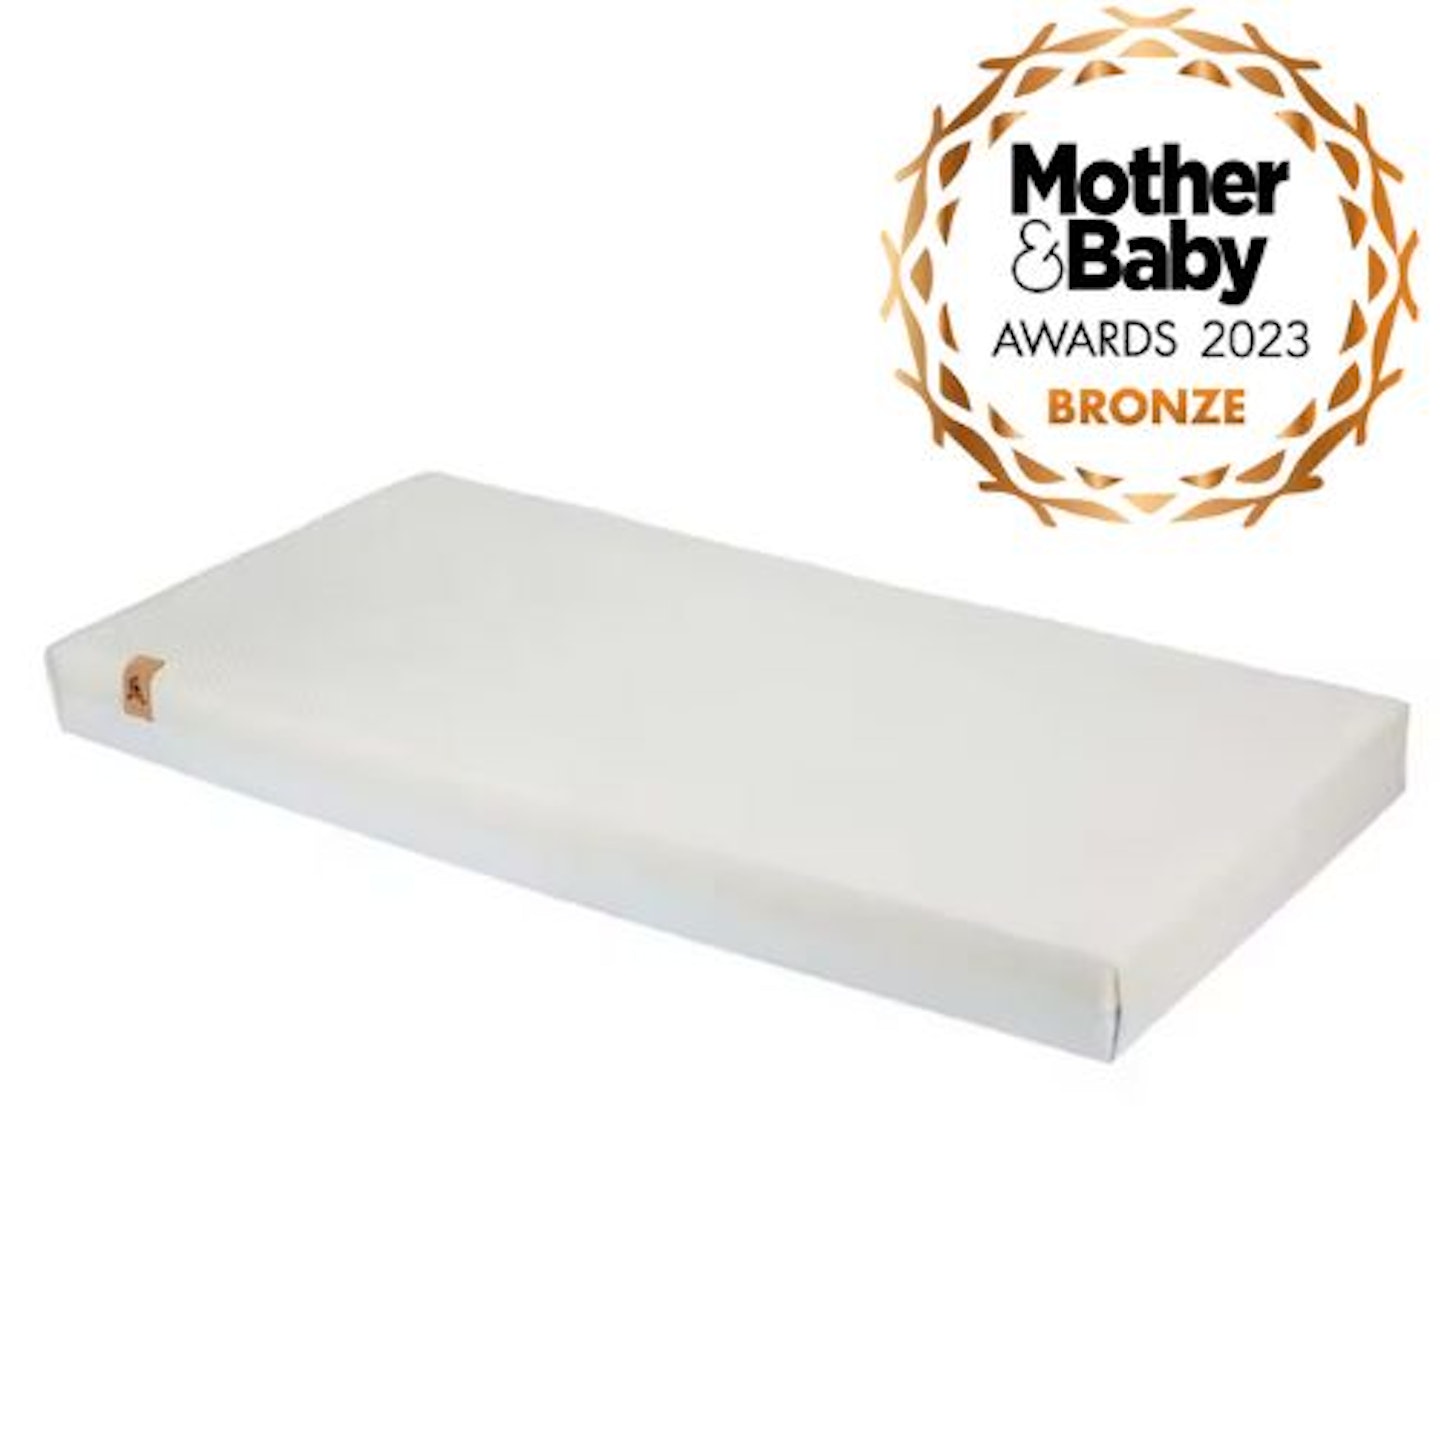 CuddleCo Signature hypo-allergenic bamboo pocket sprung cot bed mattress